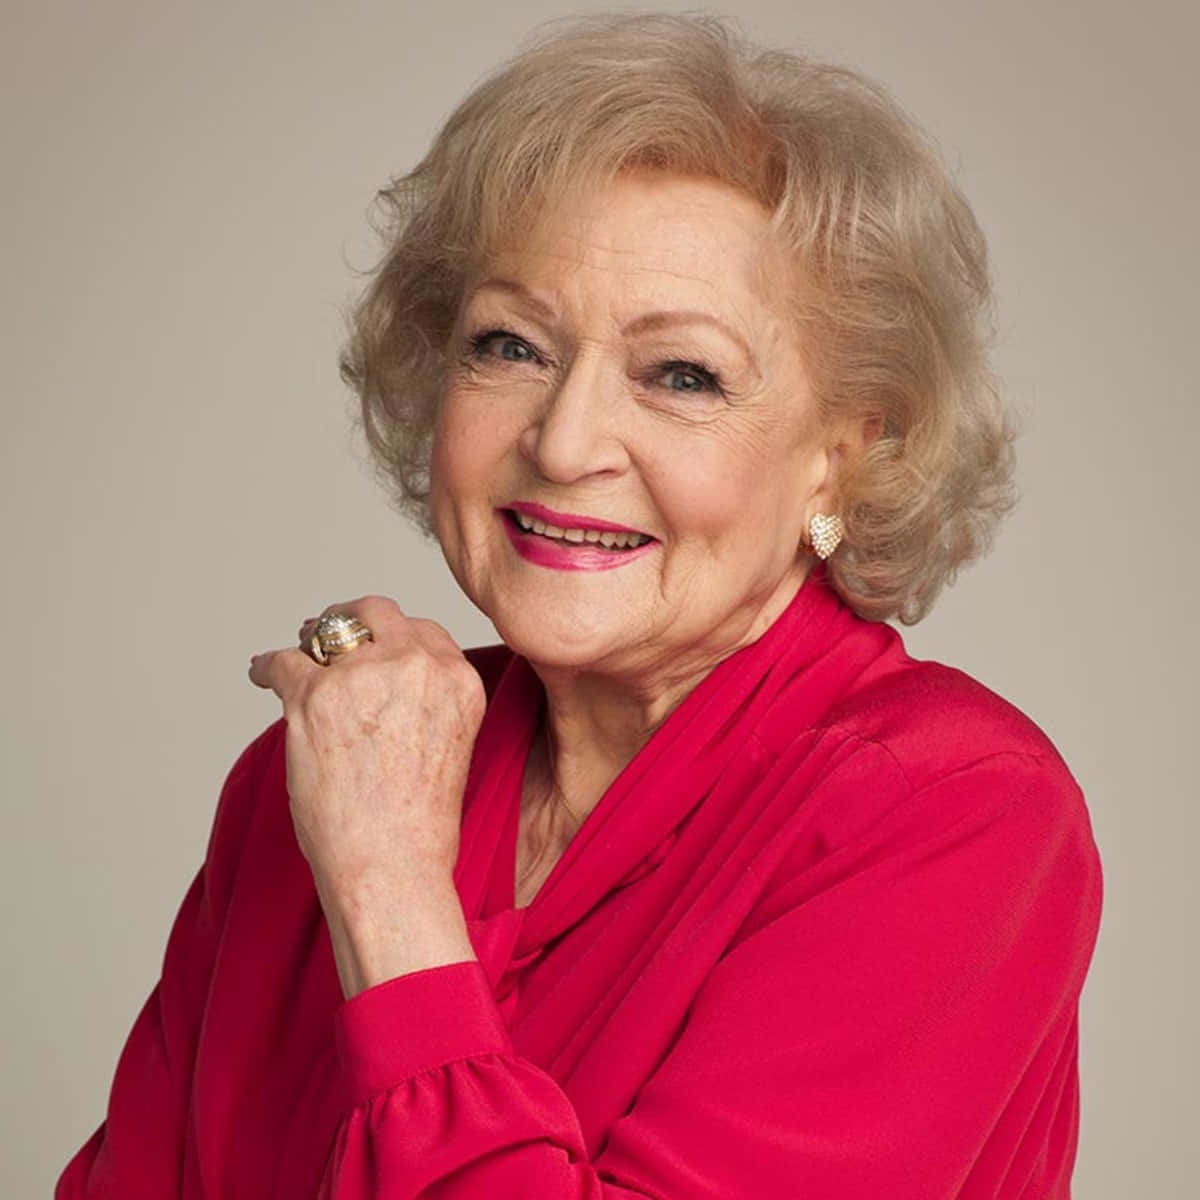 Betty White smiling with her vibrant energy